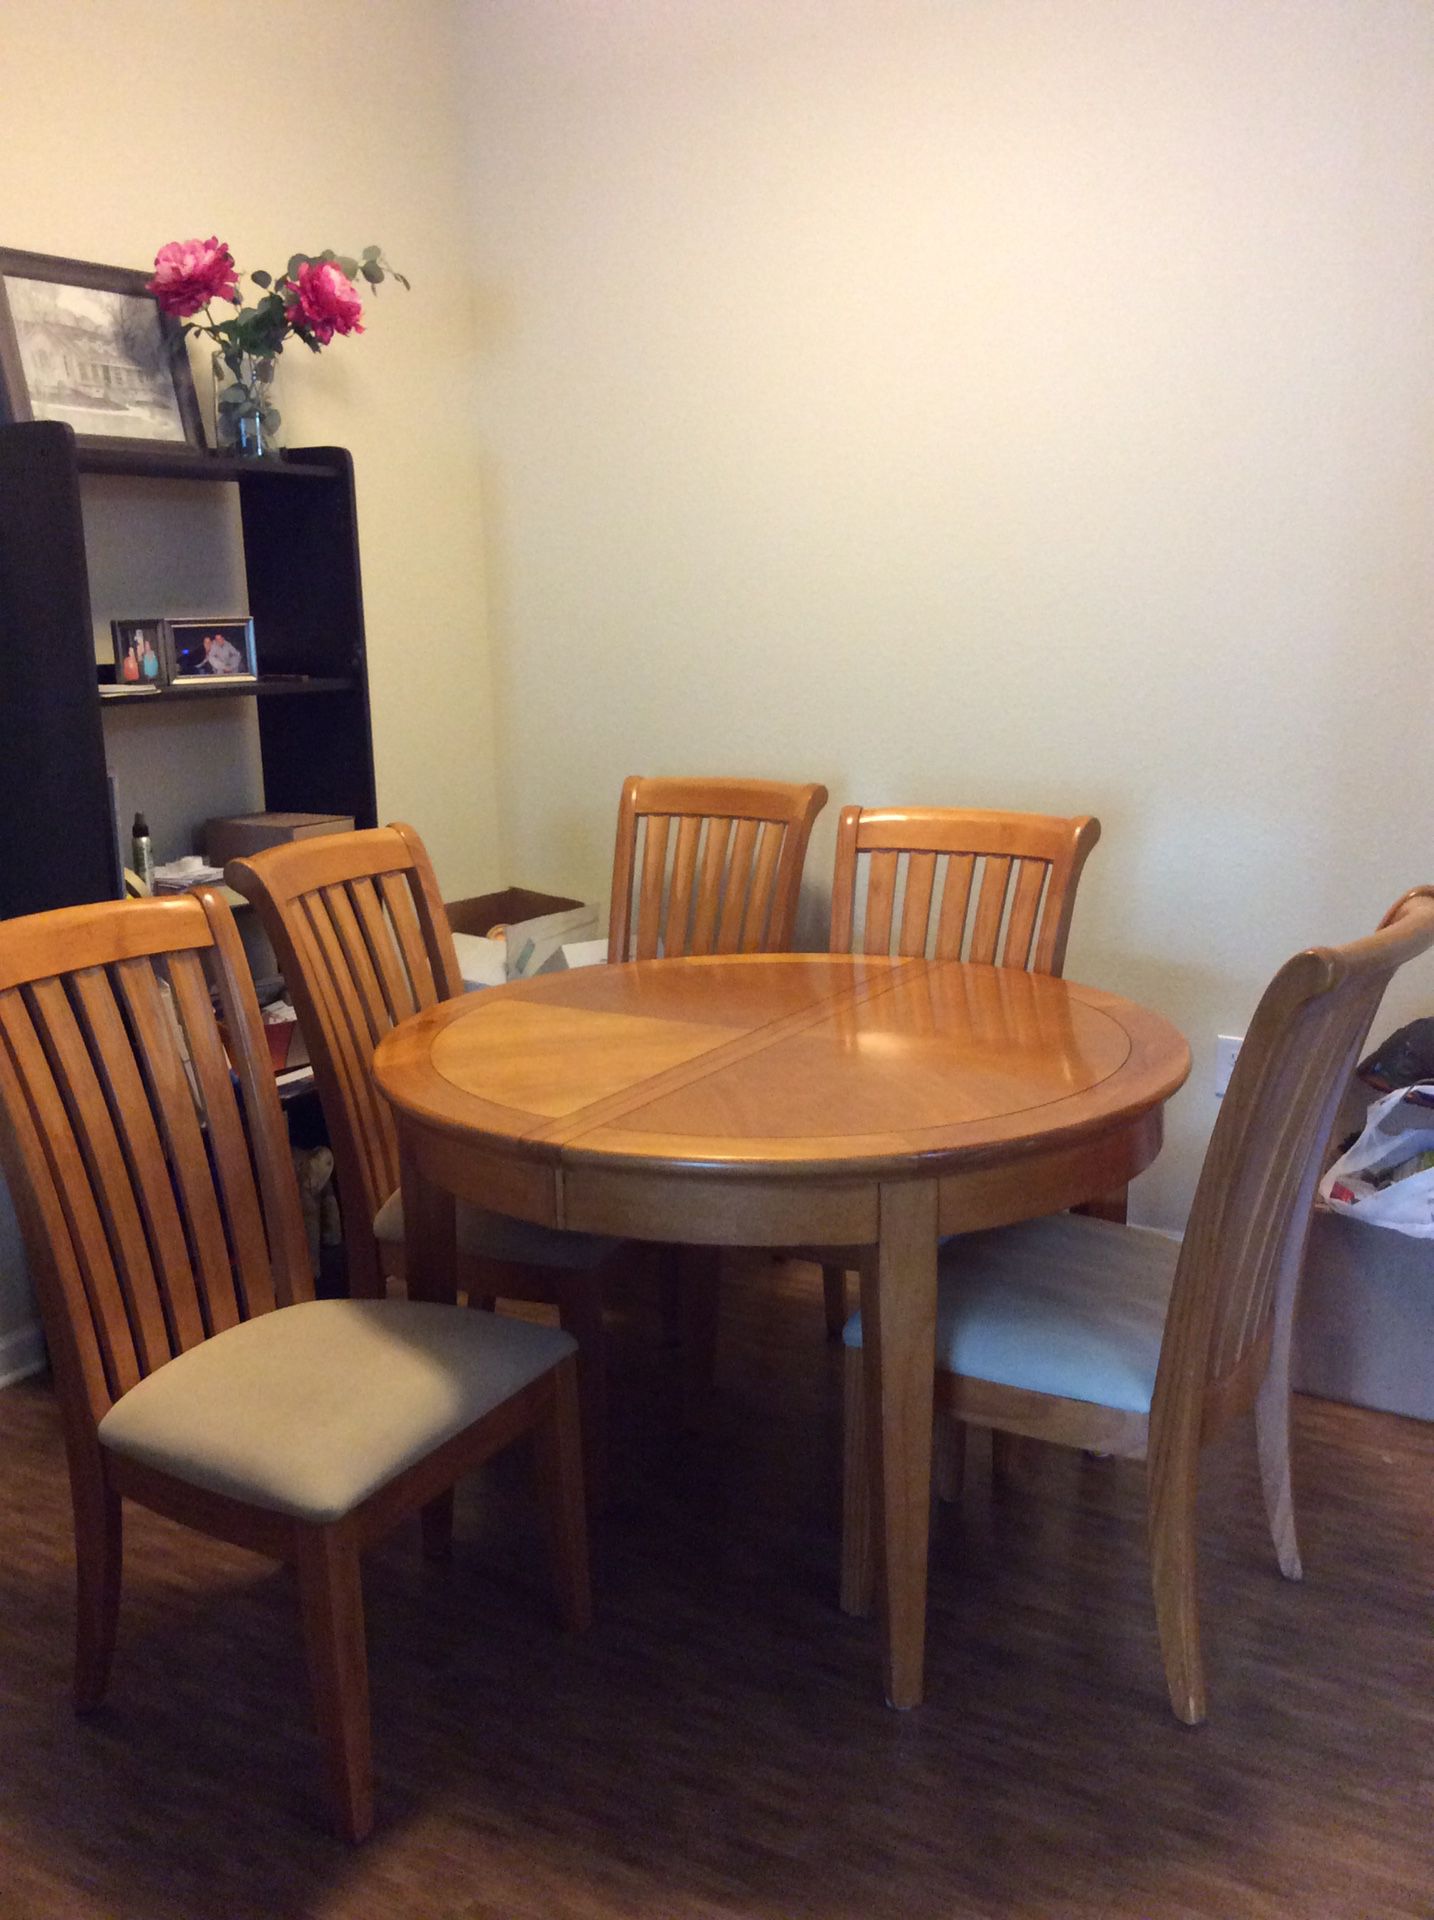 MUST SELL! Solid all wood dining room table - 6 chairs available